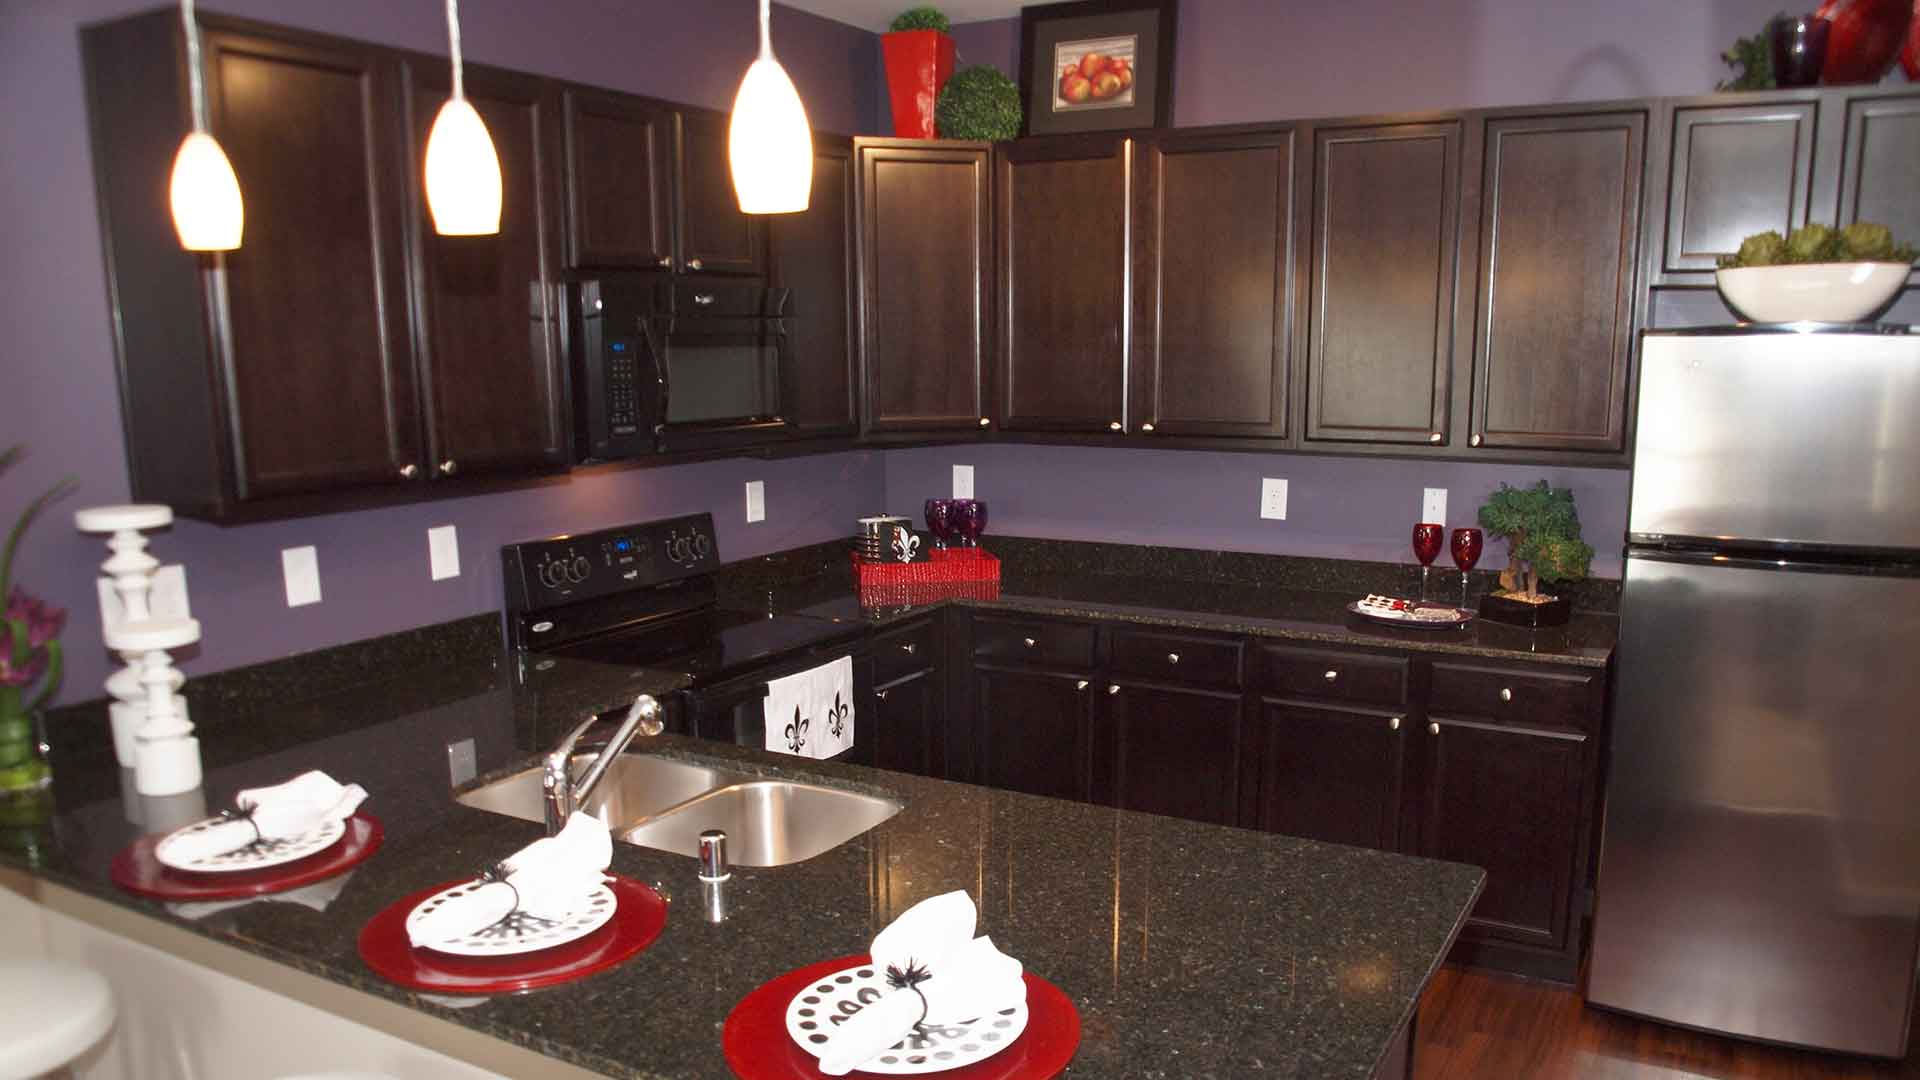 Kitchen with dark appliances and solid wood cabinets.